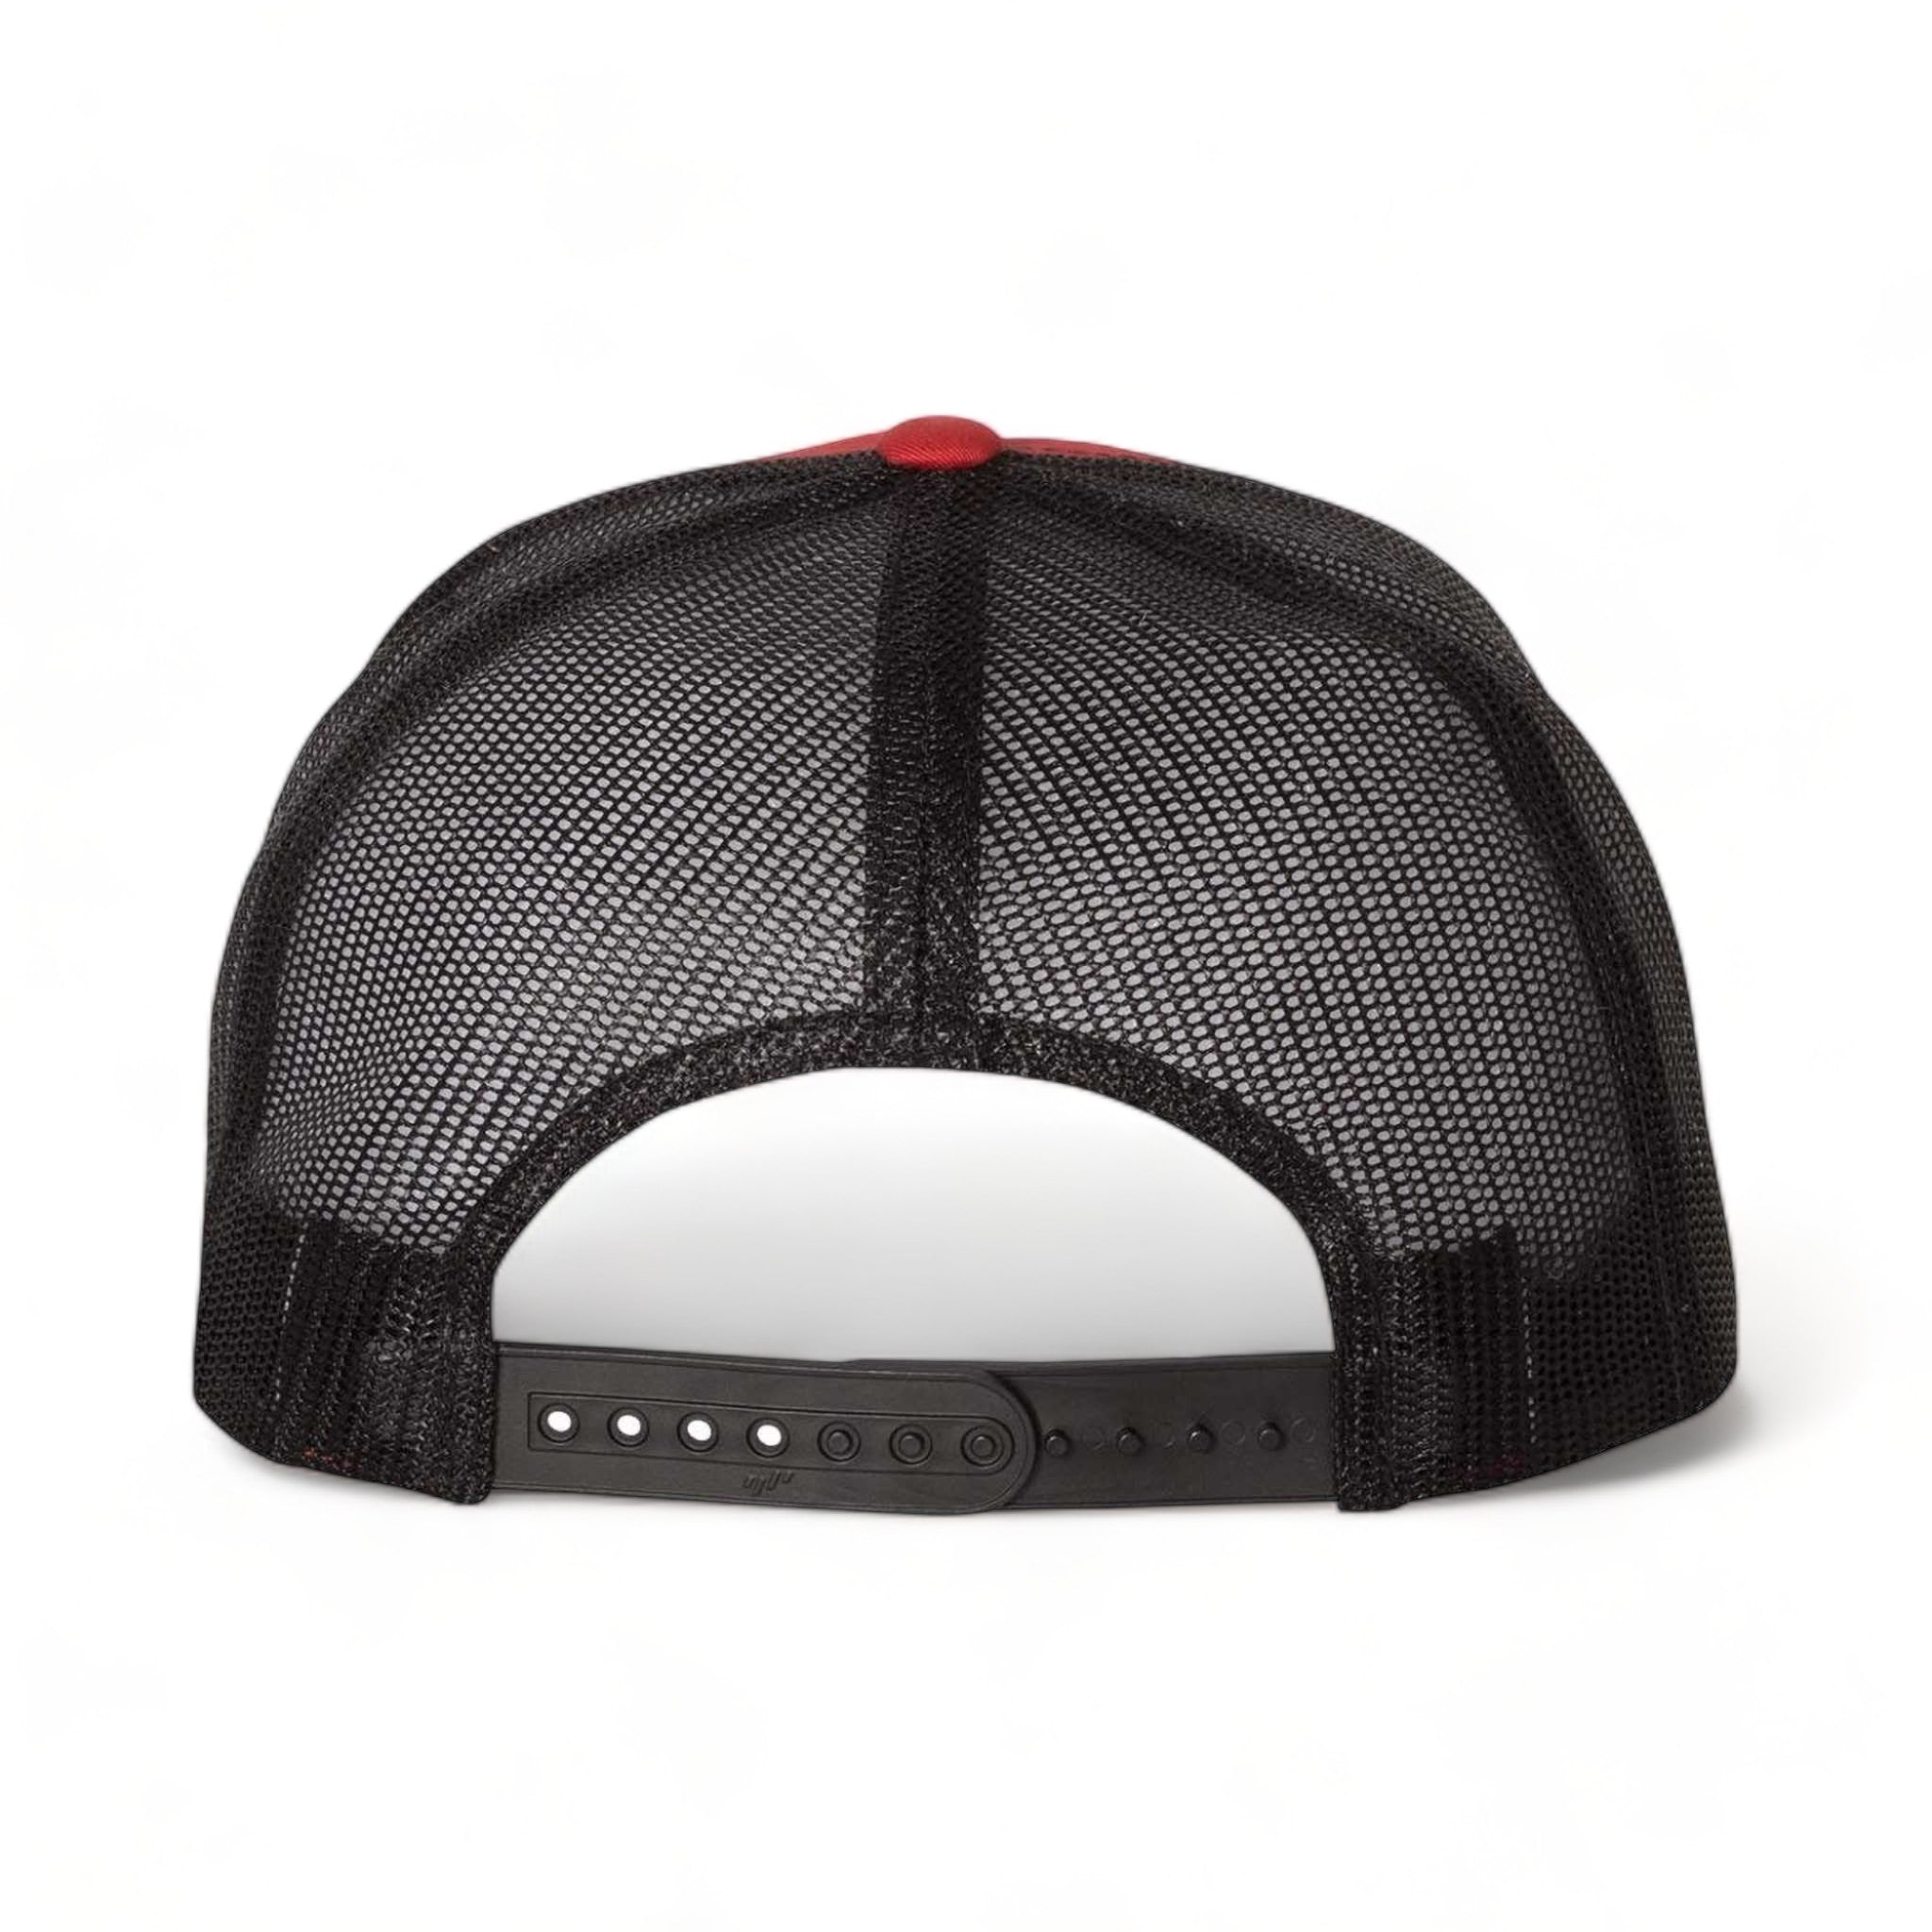 Back view of YP Classics 6006 custom hat in red and black